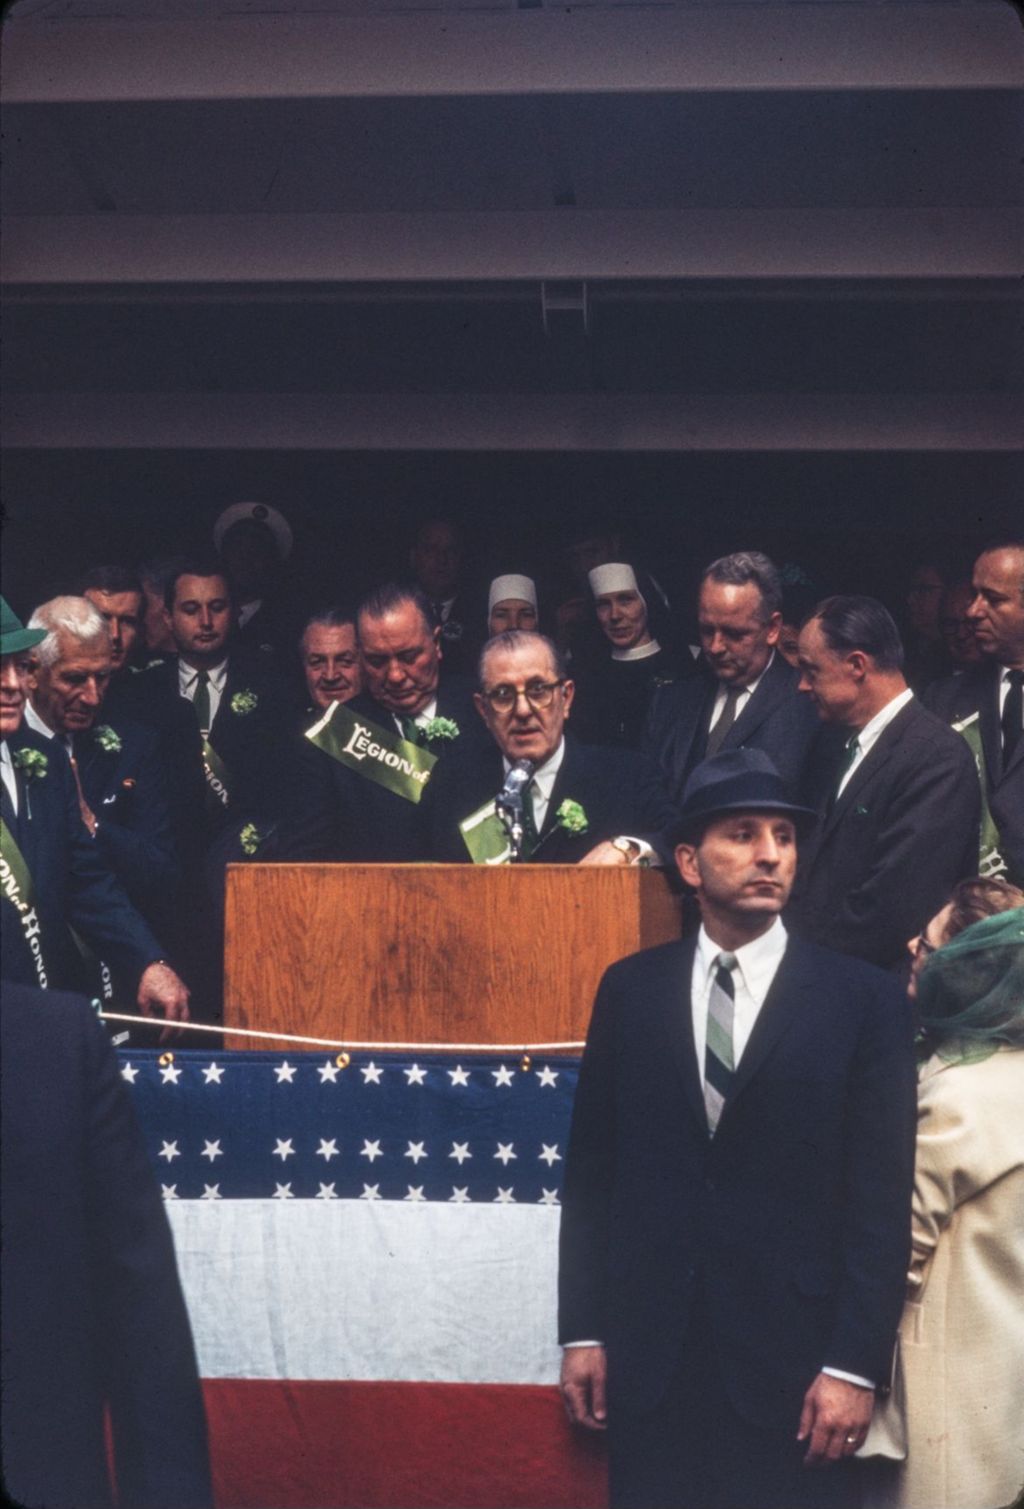 St. Patrick's Day Parade in Chicago, 1966, speaker on Reviewing Stand